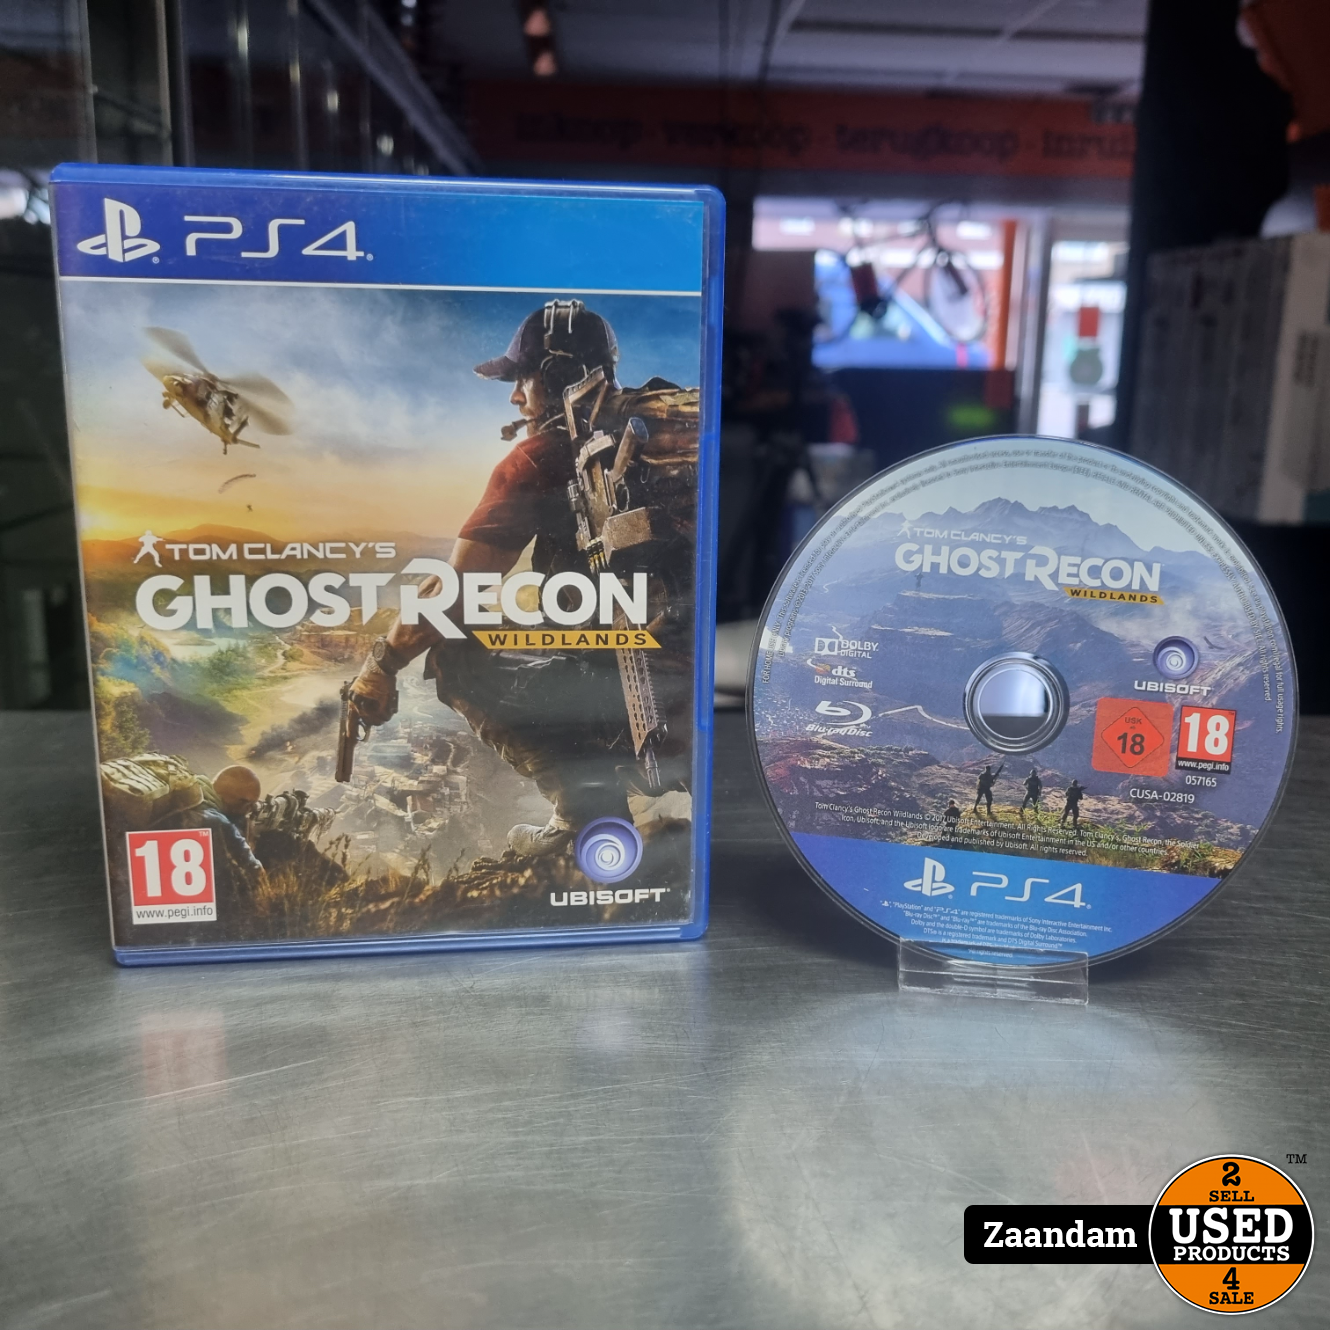 eiwit kathedraal Tussen Playstation 4 Game: Tom Clancy's Ghost Recon Wildlands - Used Products  Zaandam